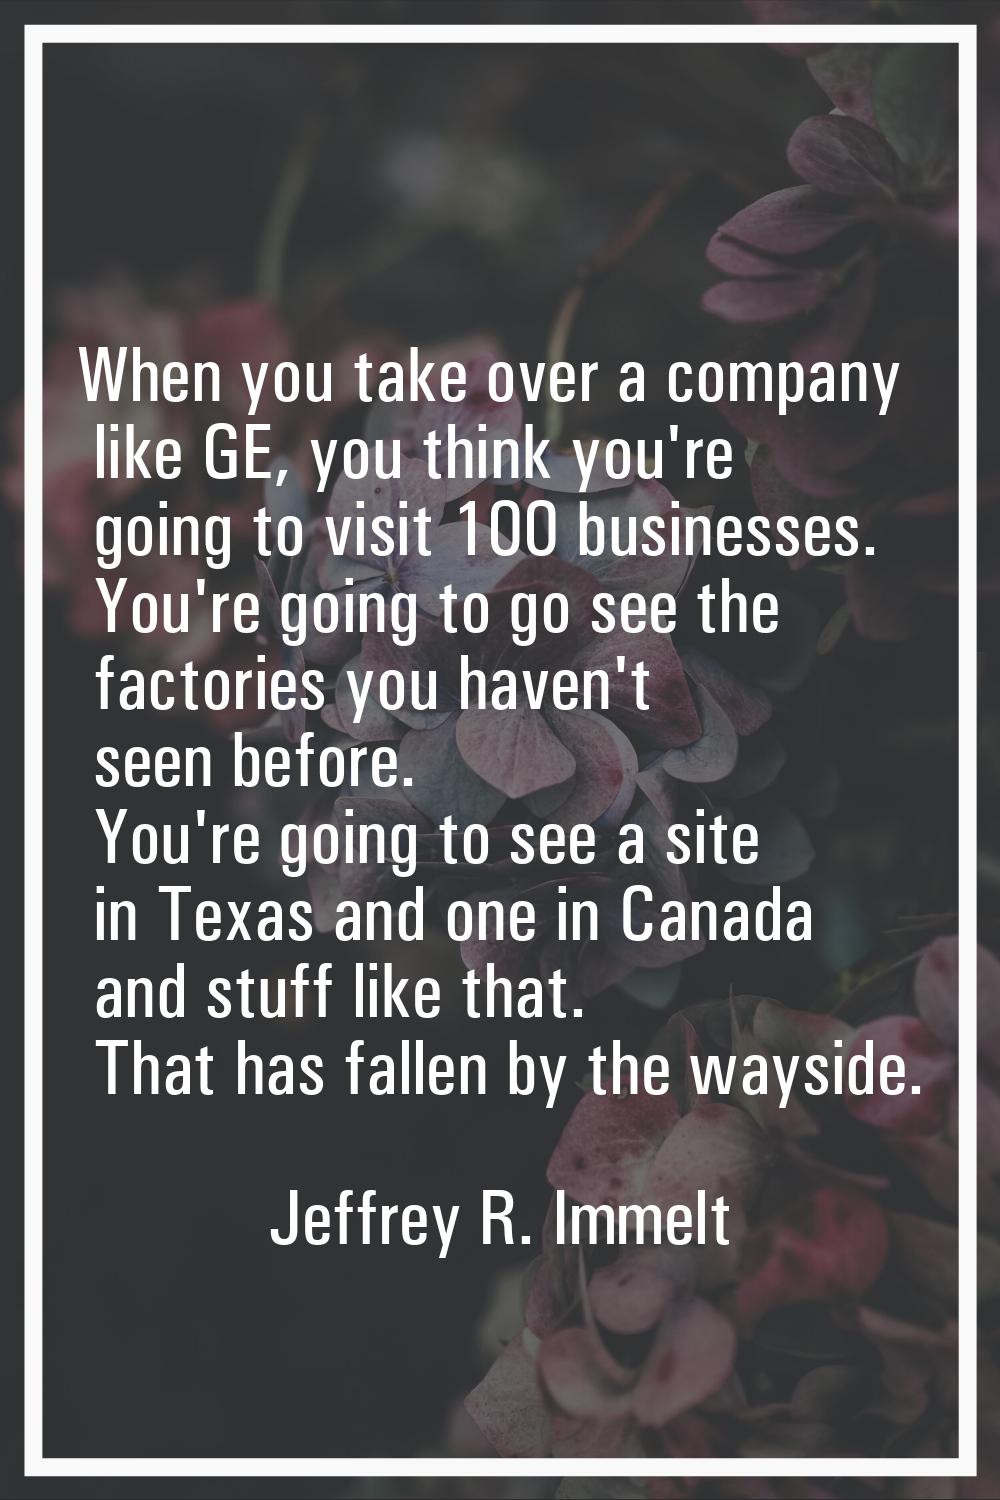 When you take over a company like GE, you think you're going to visit 100 businesses. You're going 